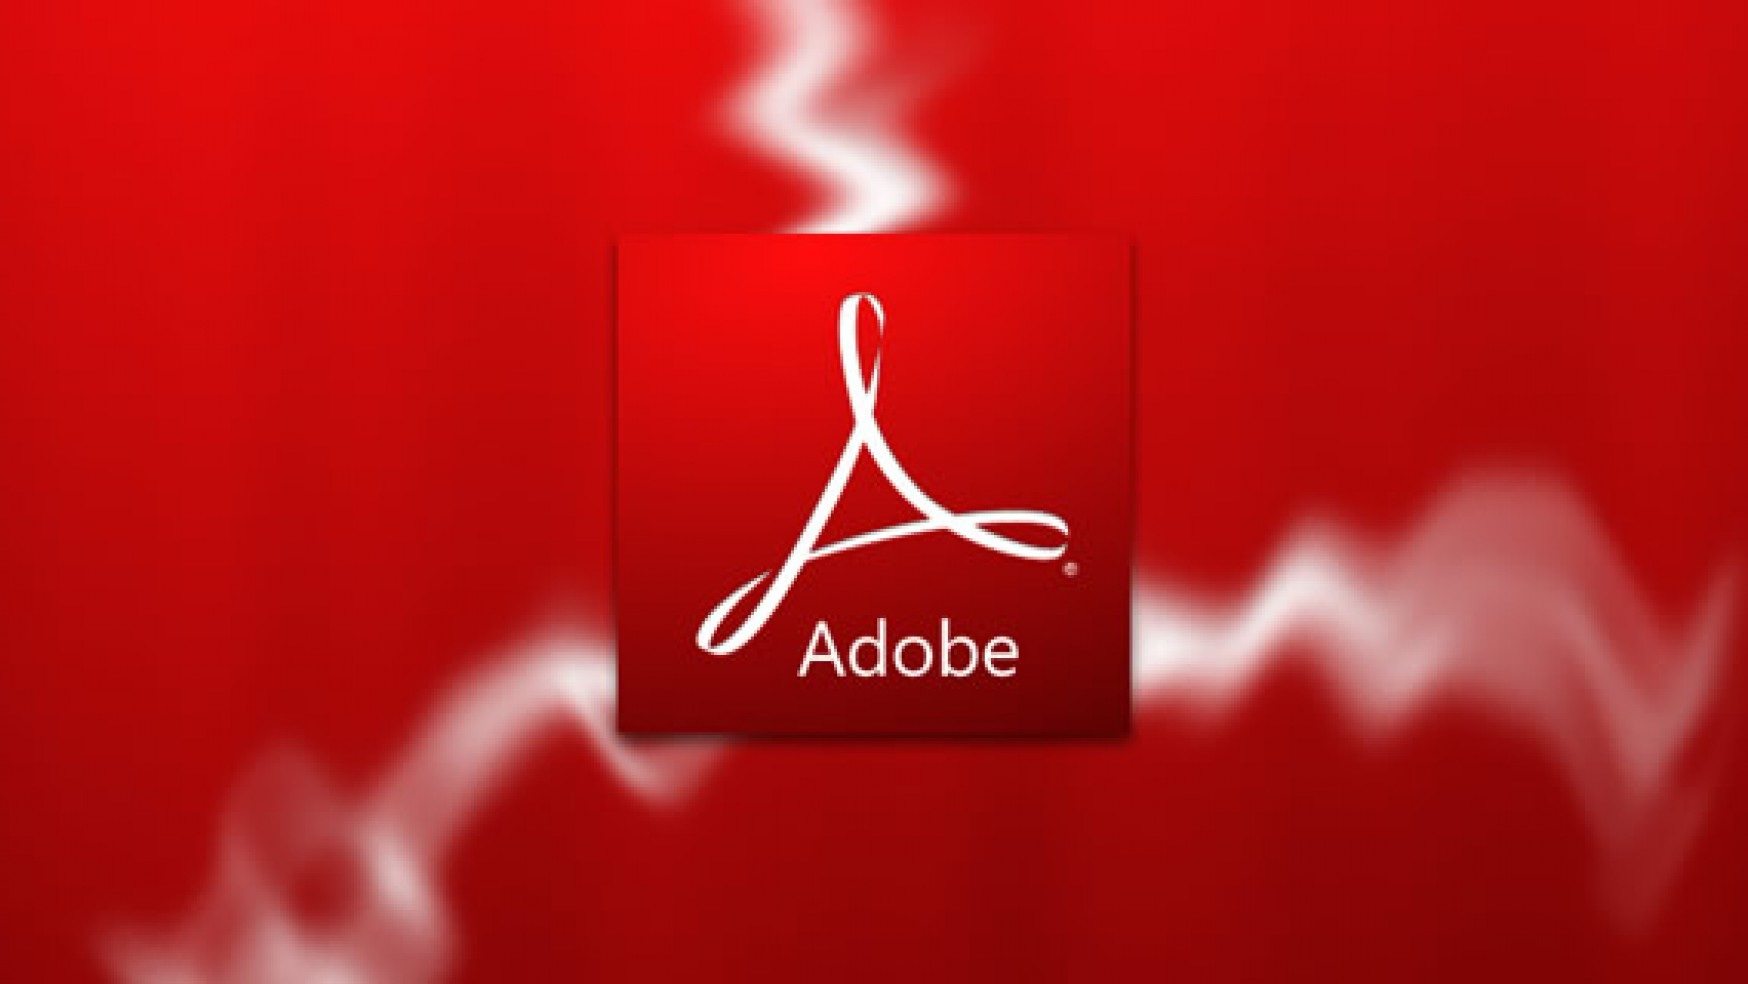 adobe flash player free download for windows 8 full version